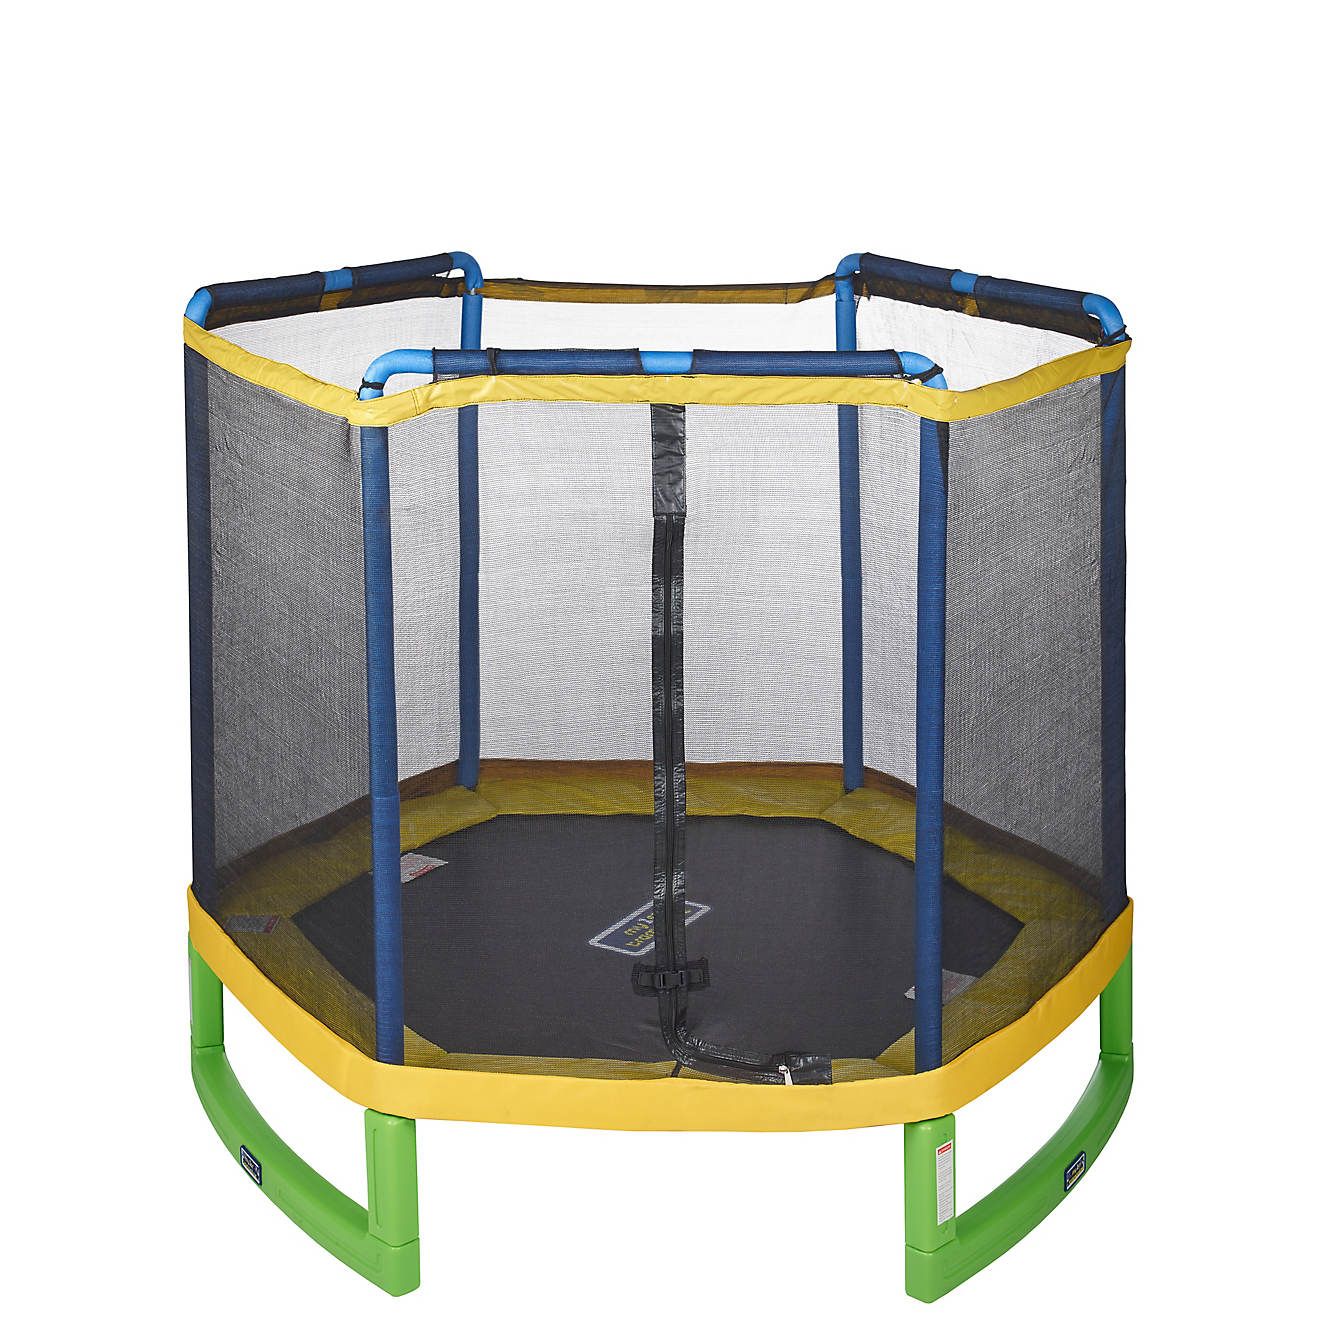 JumpZone 7 ft My First Trampoline with Tent Top Combo | Academy Sports + Outdoor Affiliate